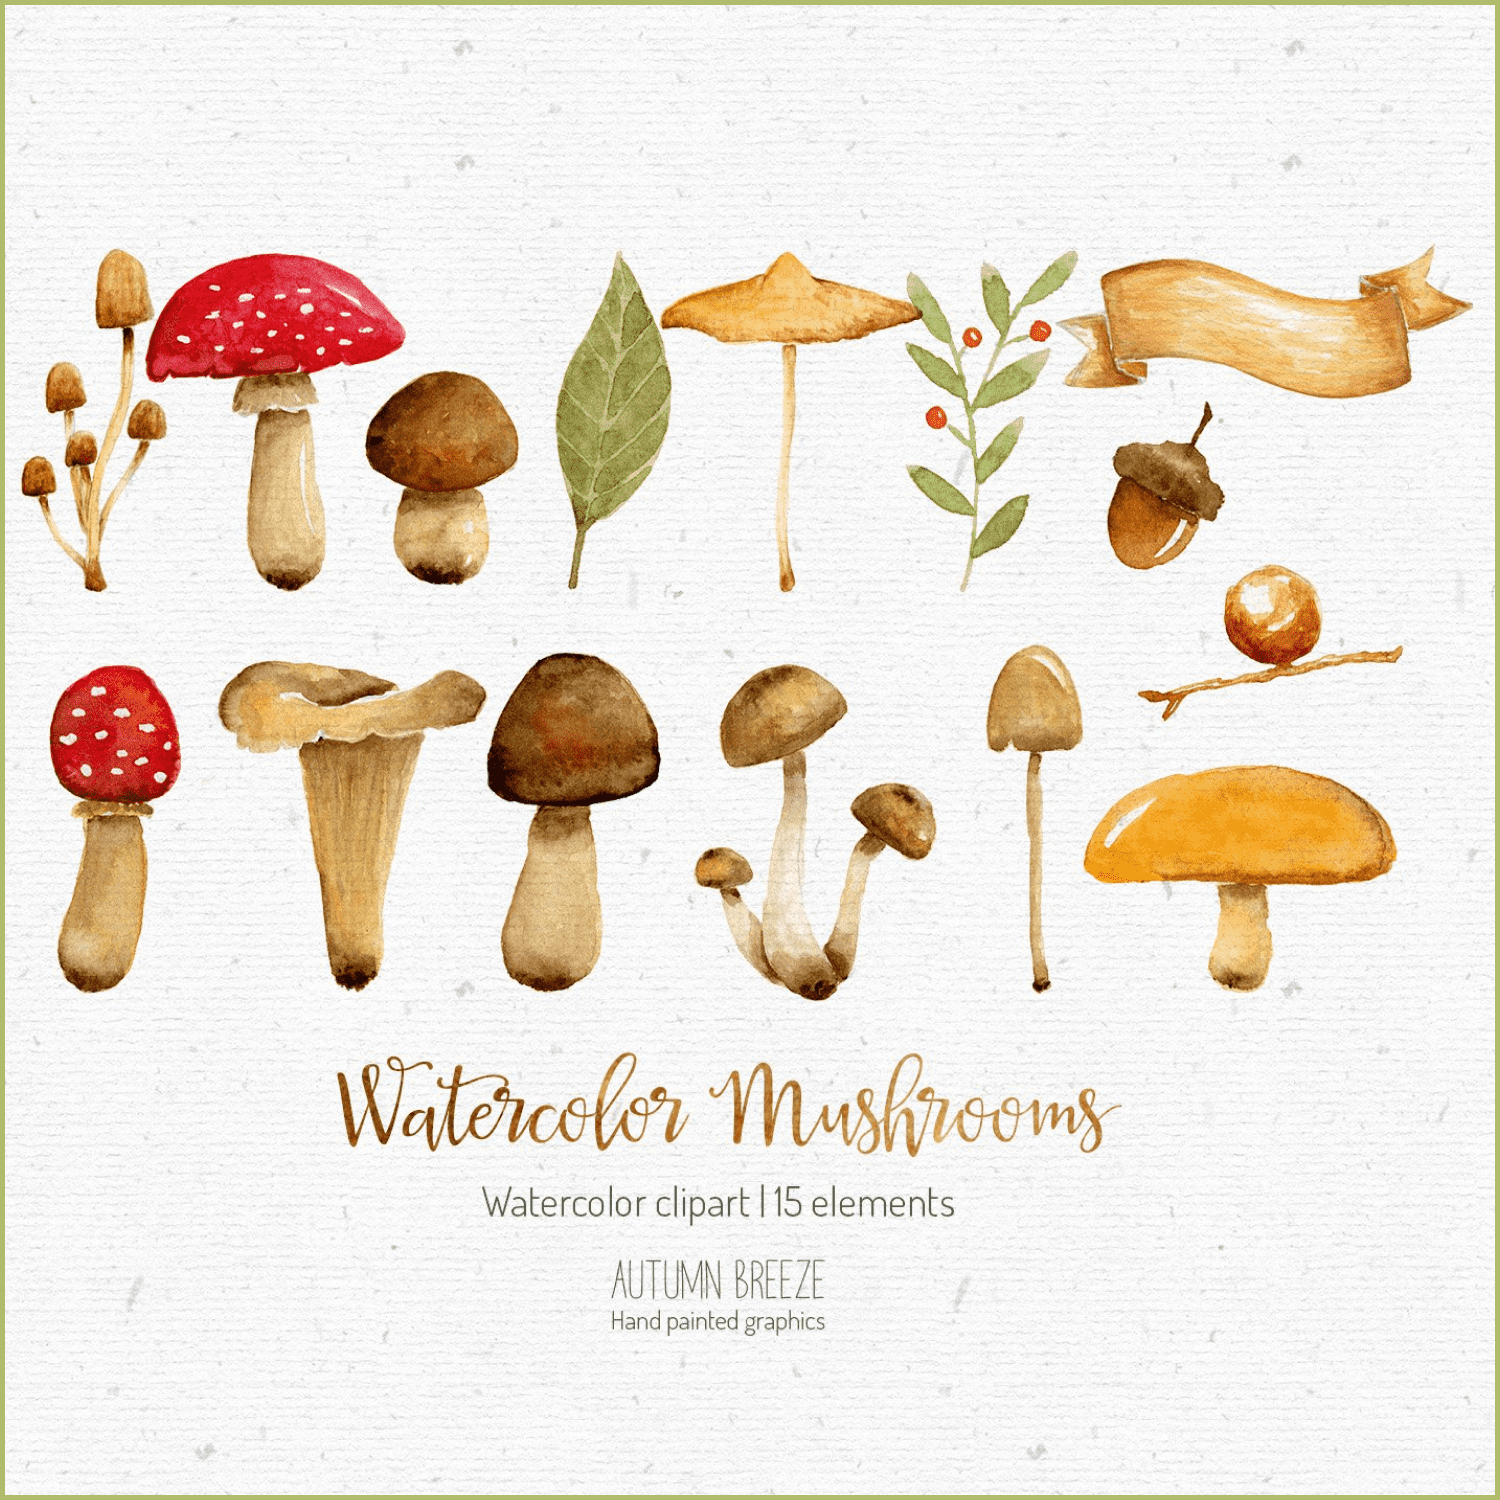 Watercolor mushroom clipart created by Autumn Breeze.